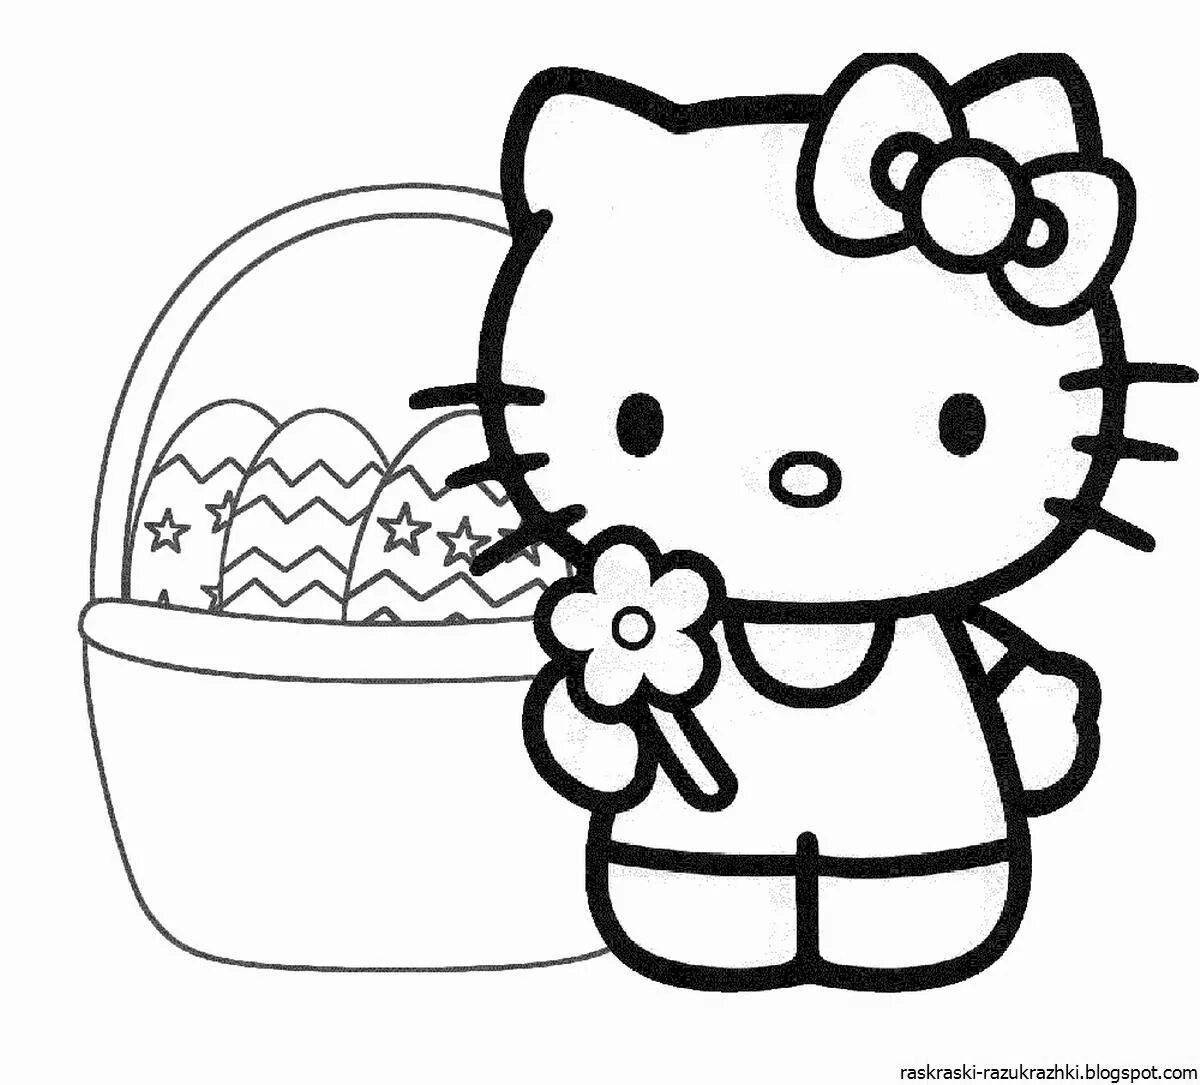 Funny hello kitty coloring book for kids